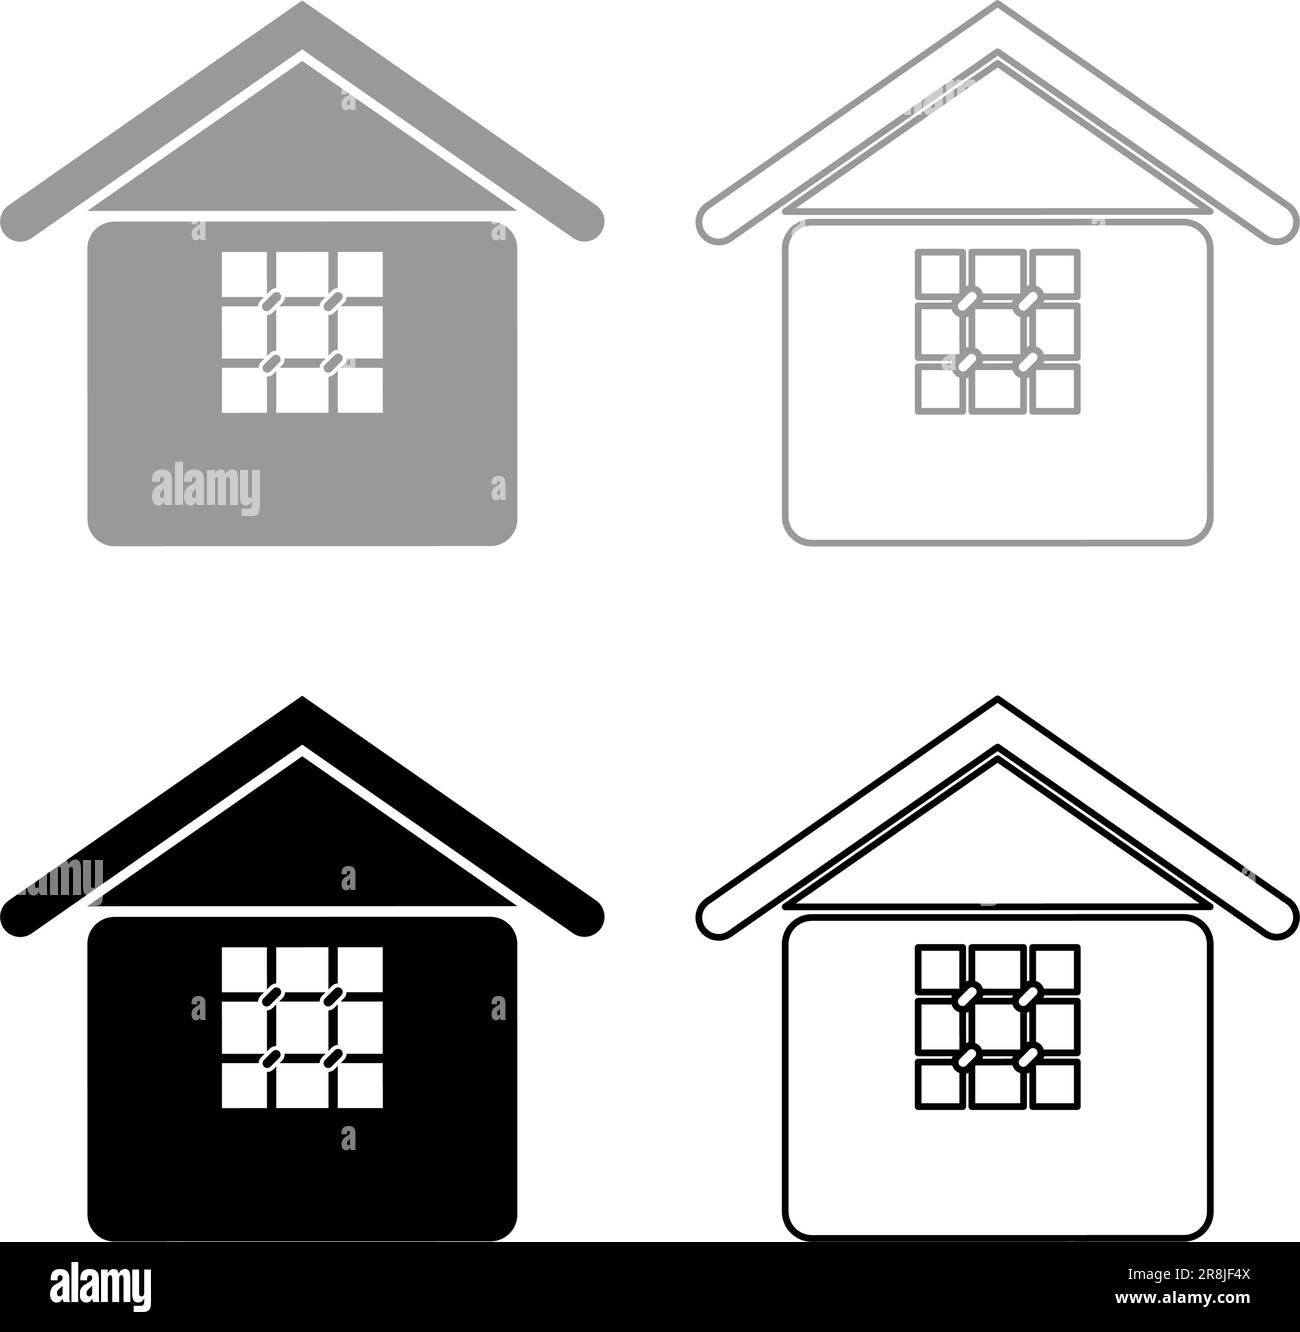 Prison jail gaol House with grate on window citadel home set icon grey black color vector illustration image simple solid fill outline contour line Stock Vector